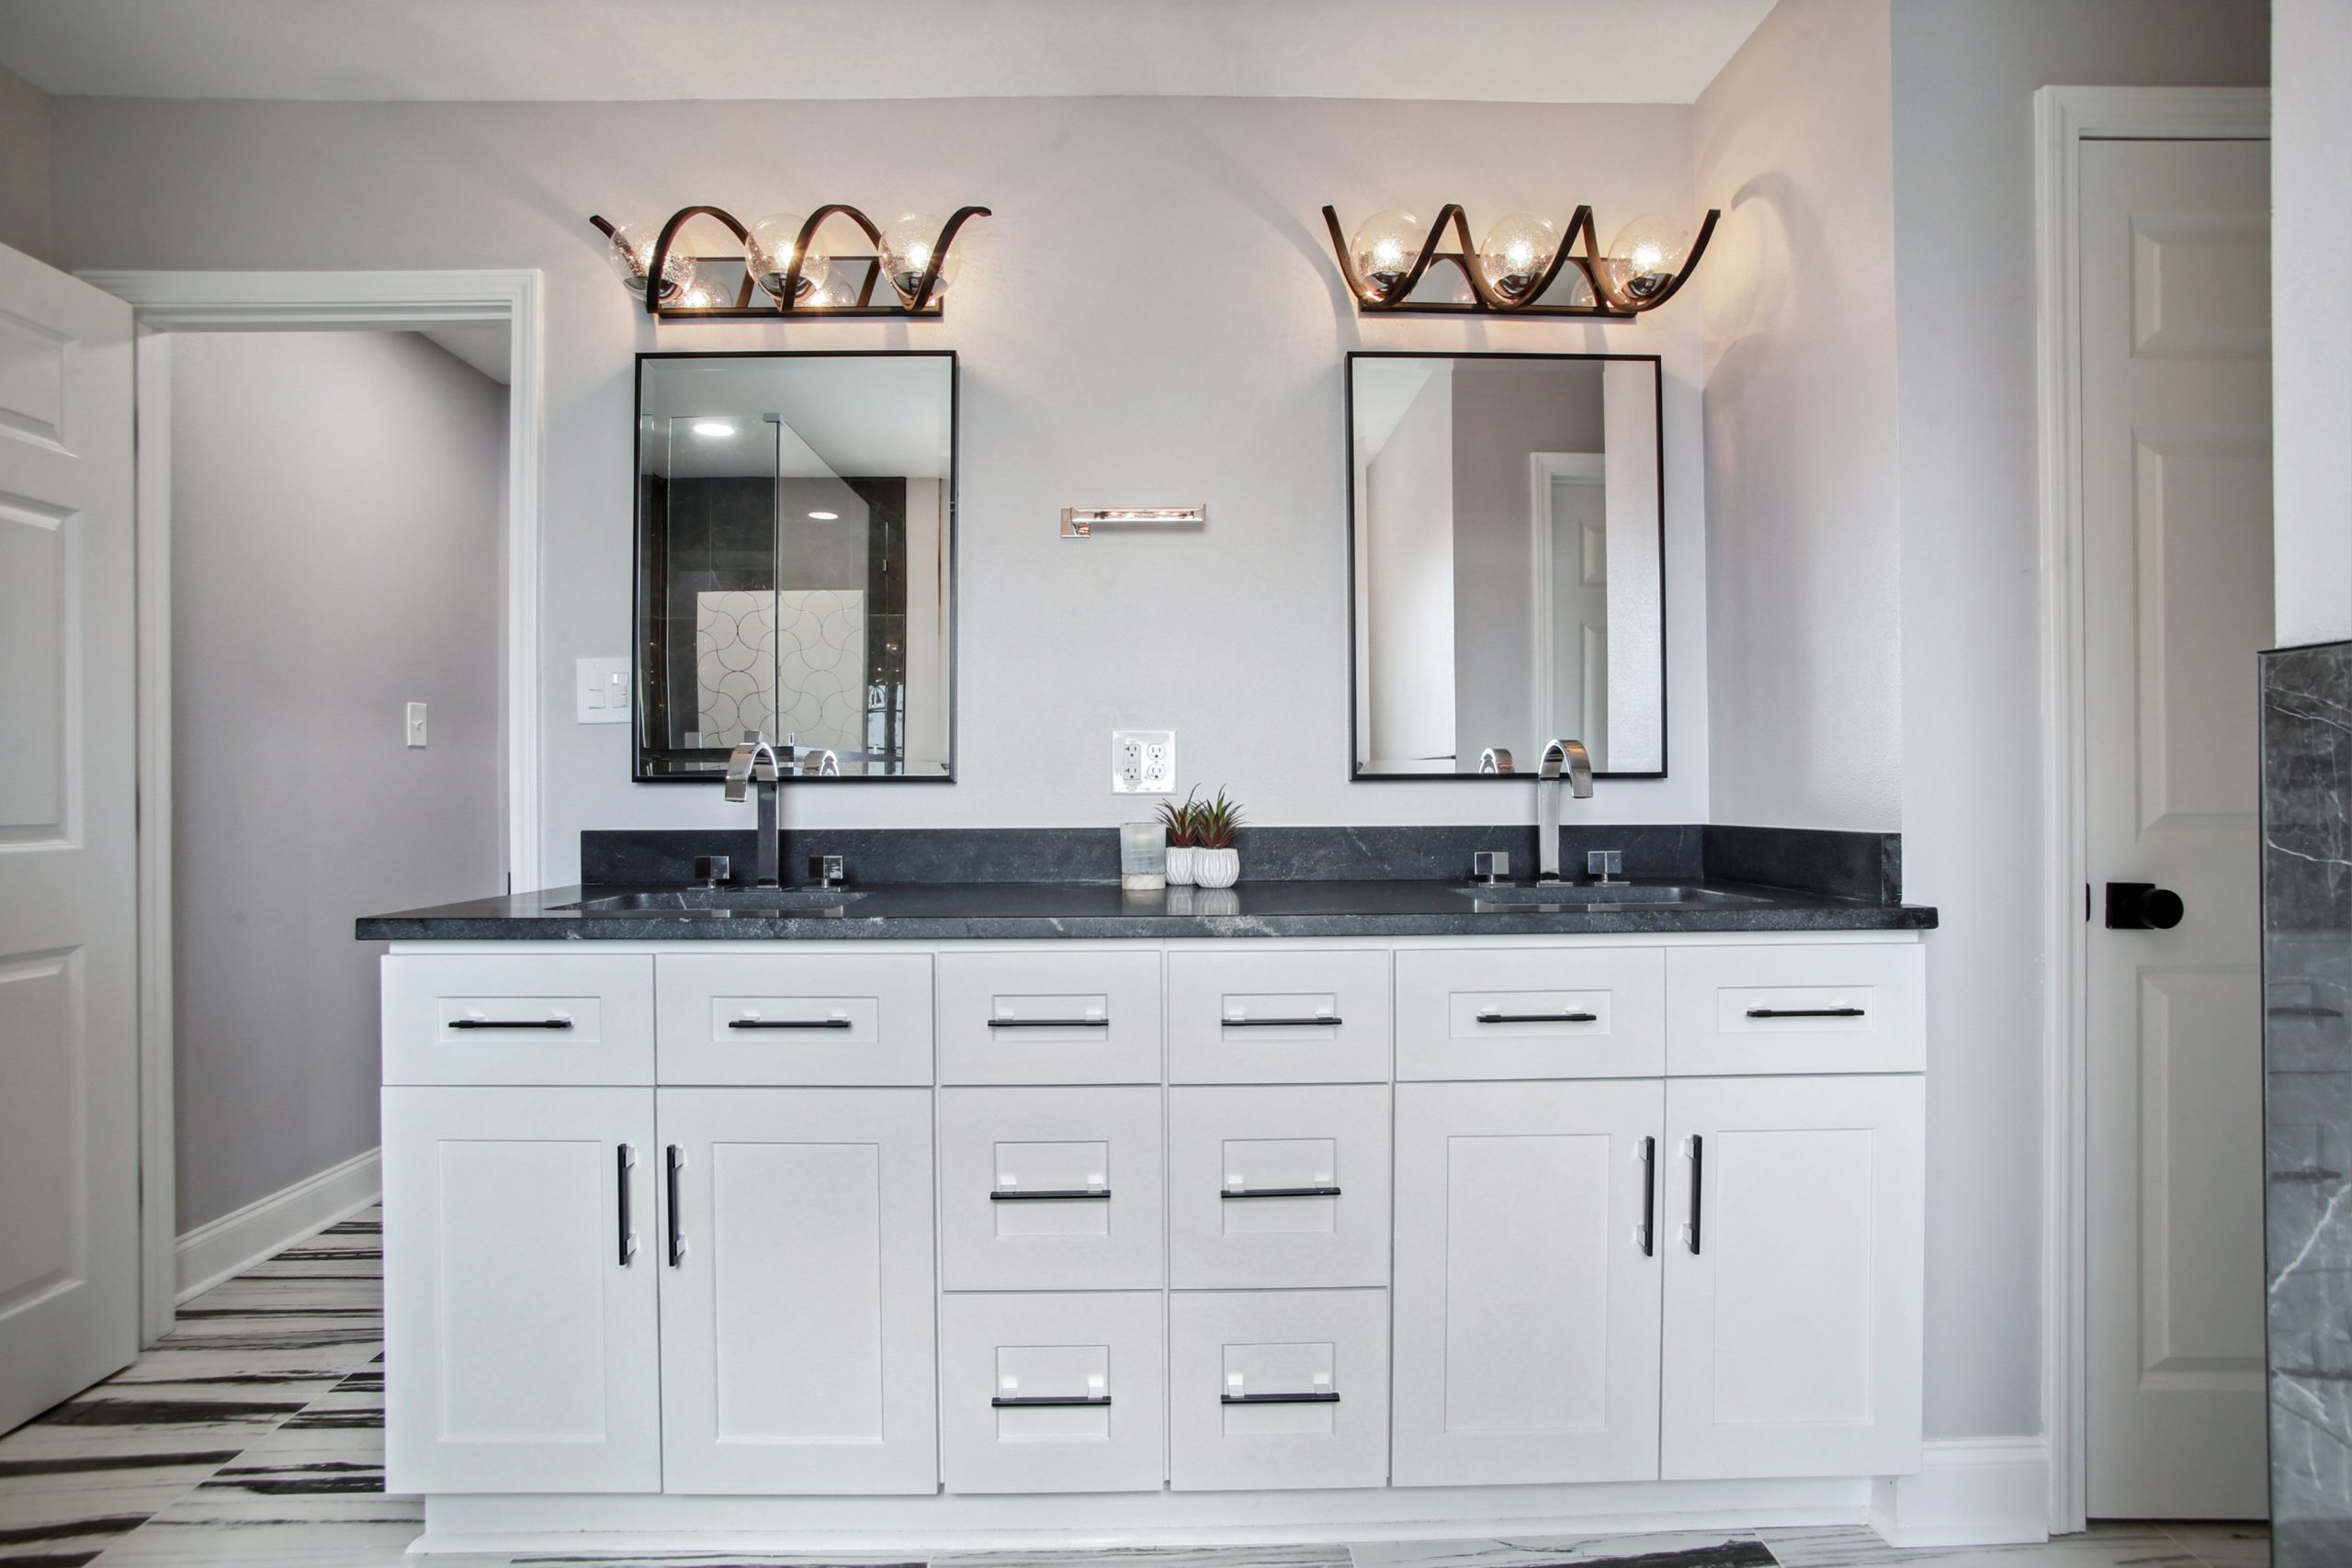 Steeple House Luxury Bathroom Renovation designed and built by DMG Design+Build